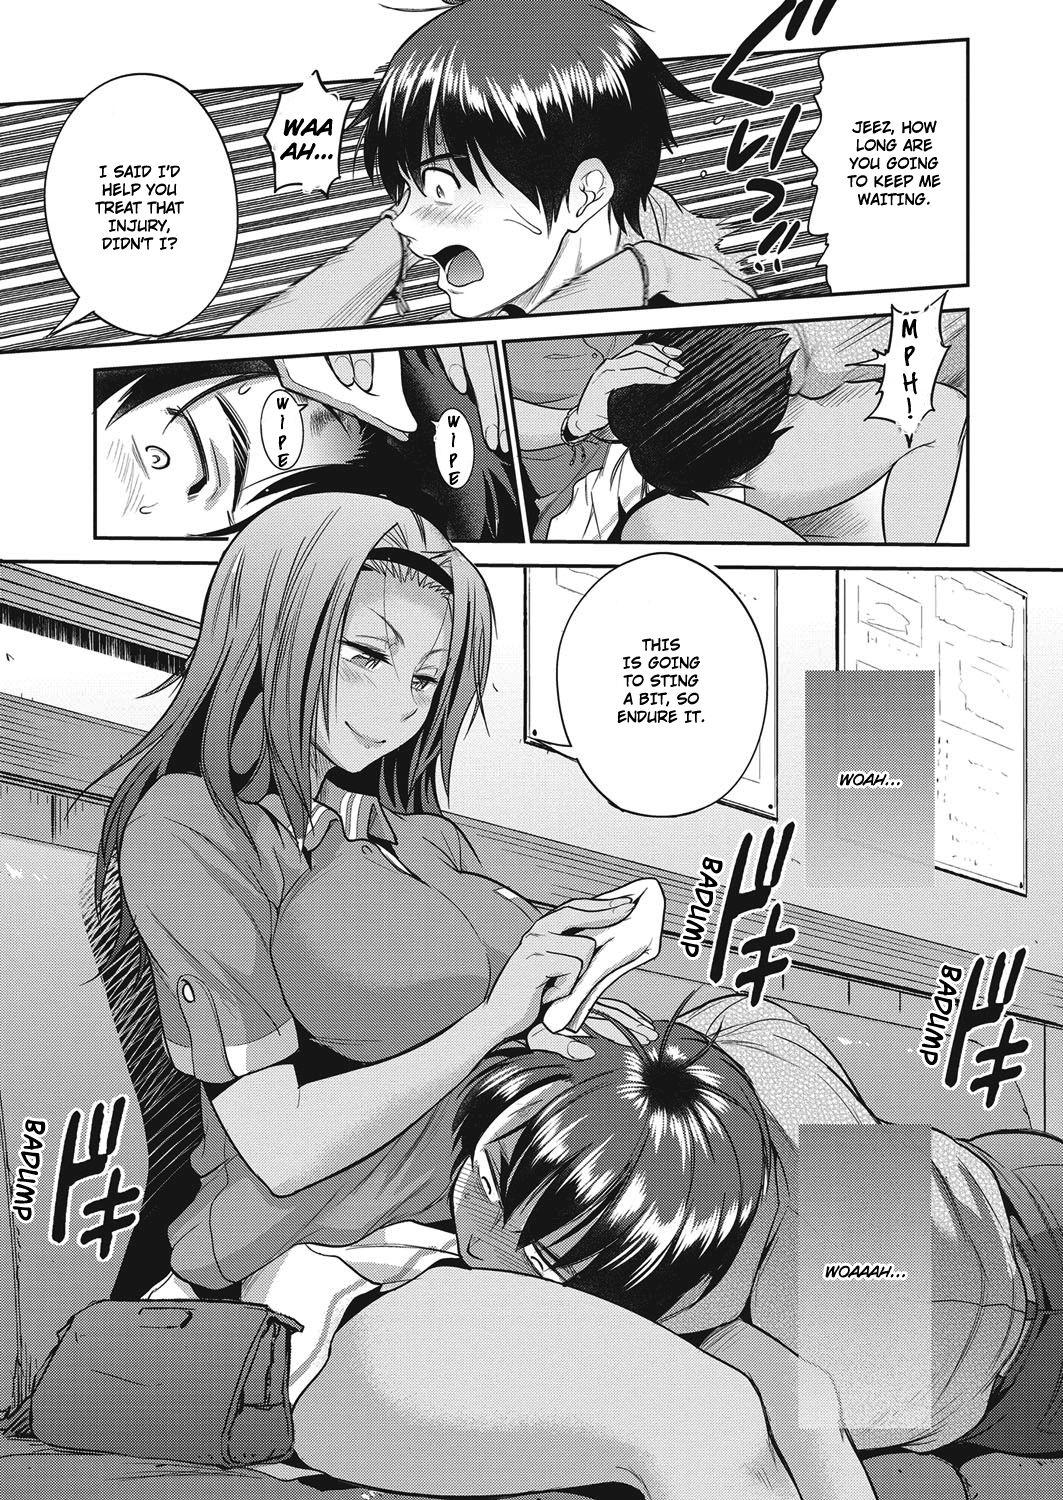 Ass Worship [DISTANCE] Joshi Lacu! - Girls Lacrosse Club ~2 Years Later~ Ch. 3 (COMIC ExE 04) [English] [TripleSevenScans] [Digital] Girls Getting Fucked - Page 3